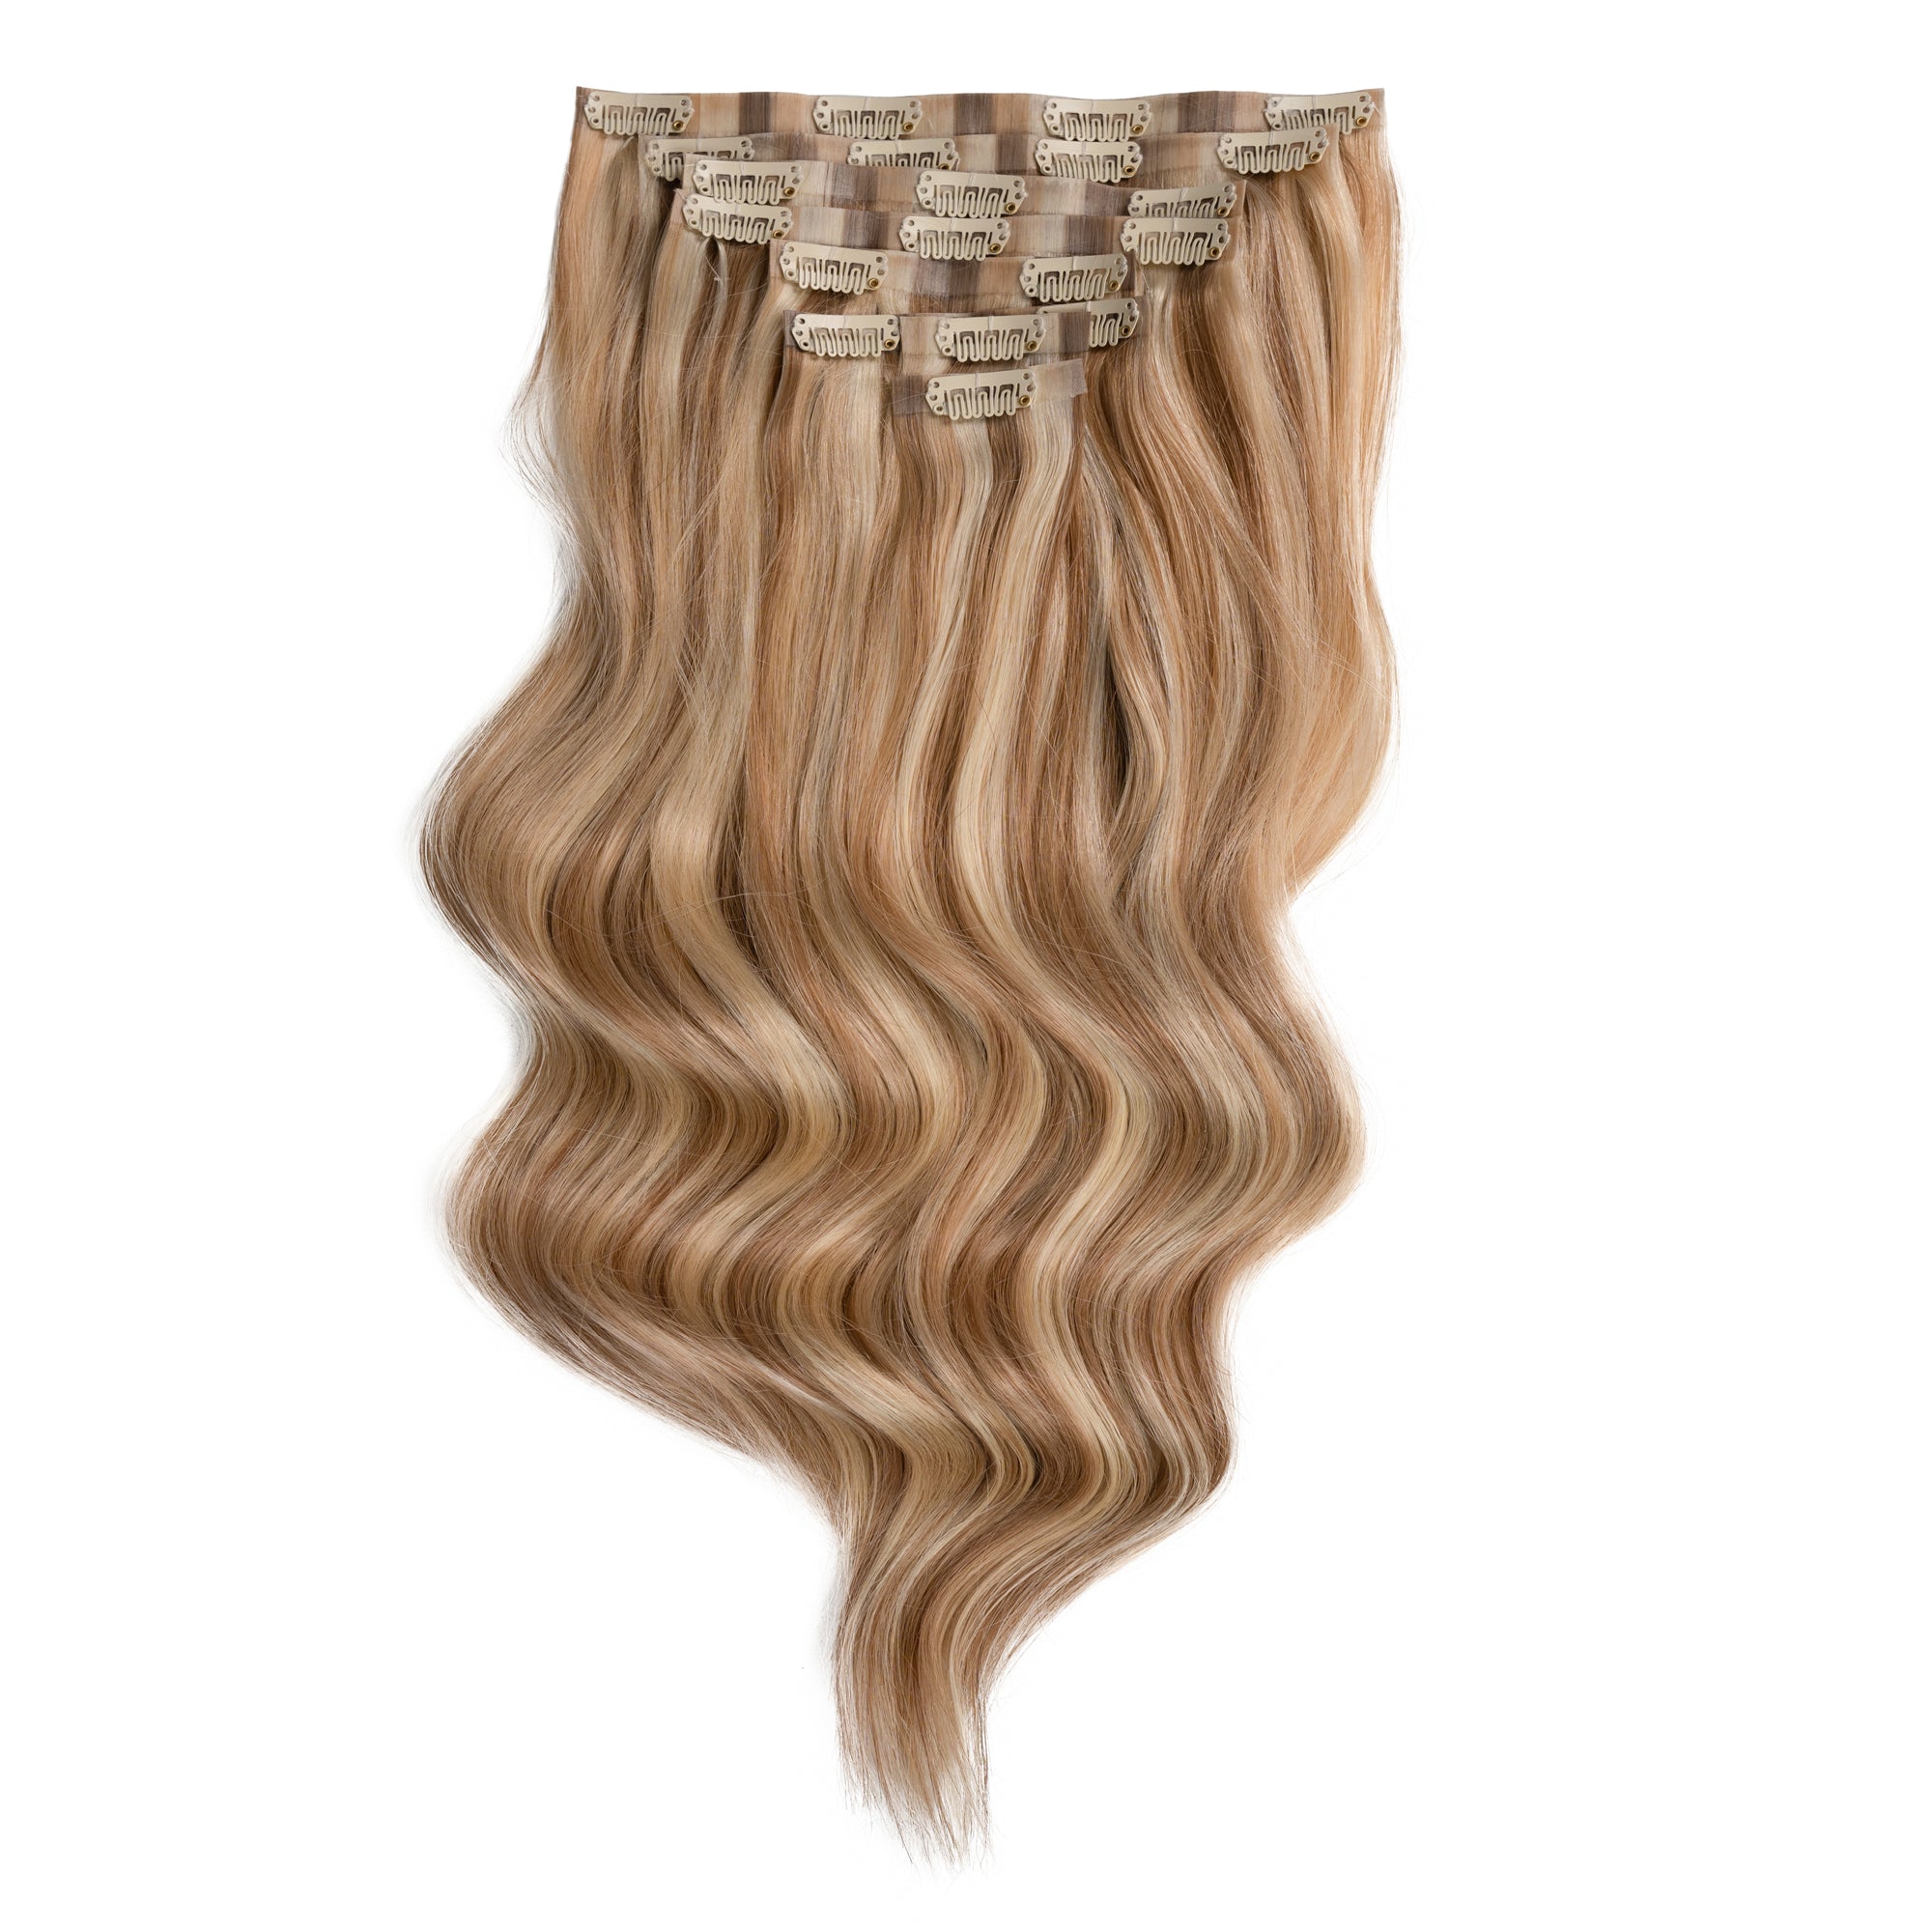 Empress Deluxe Clip-in Hair Extensions 18" Colour P10 24 613 - Maneology Hair Extensions